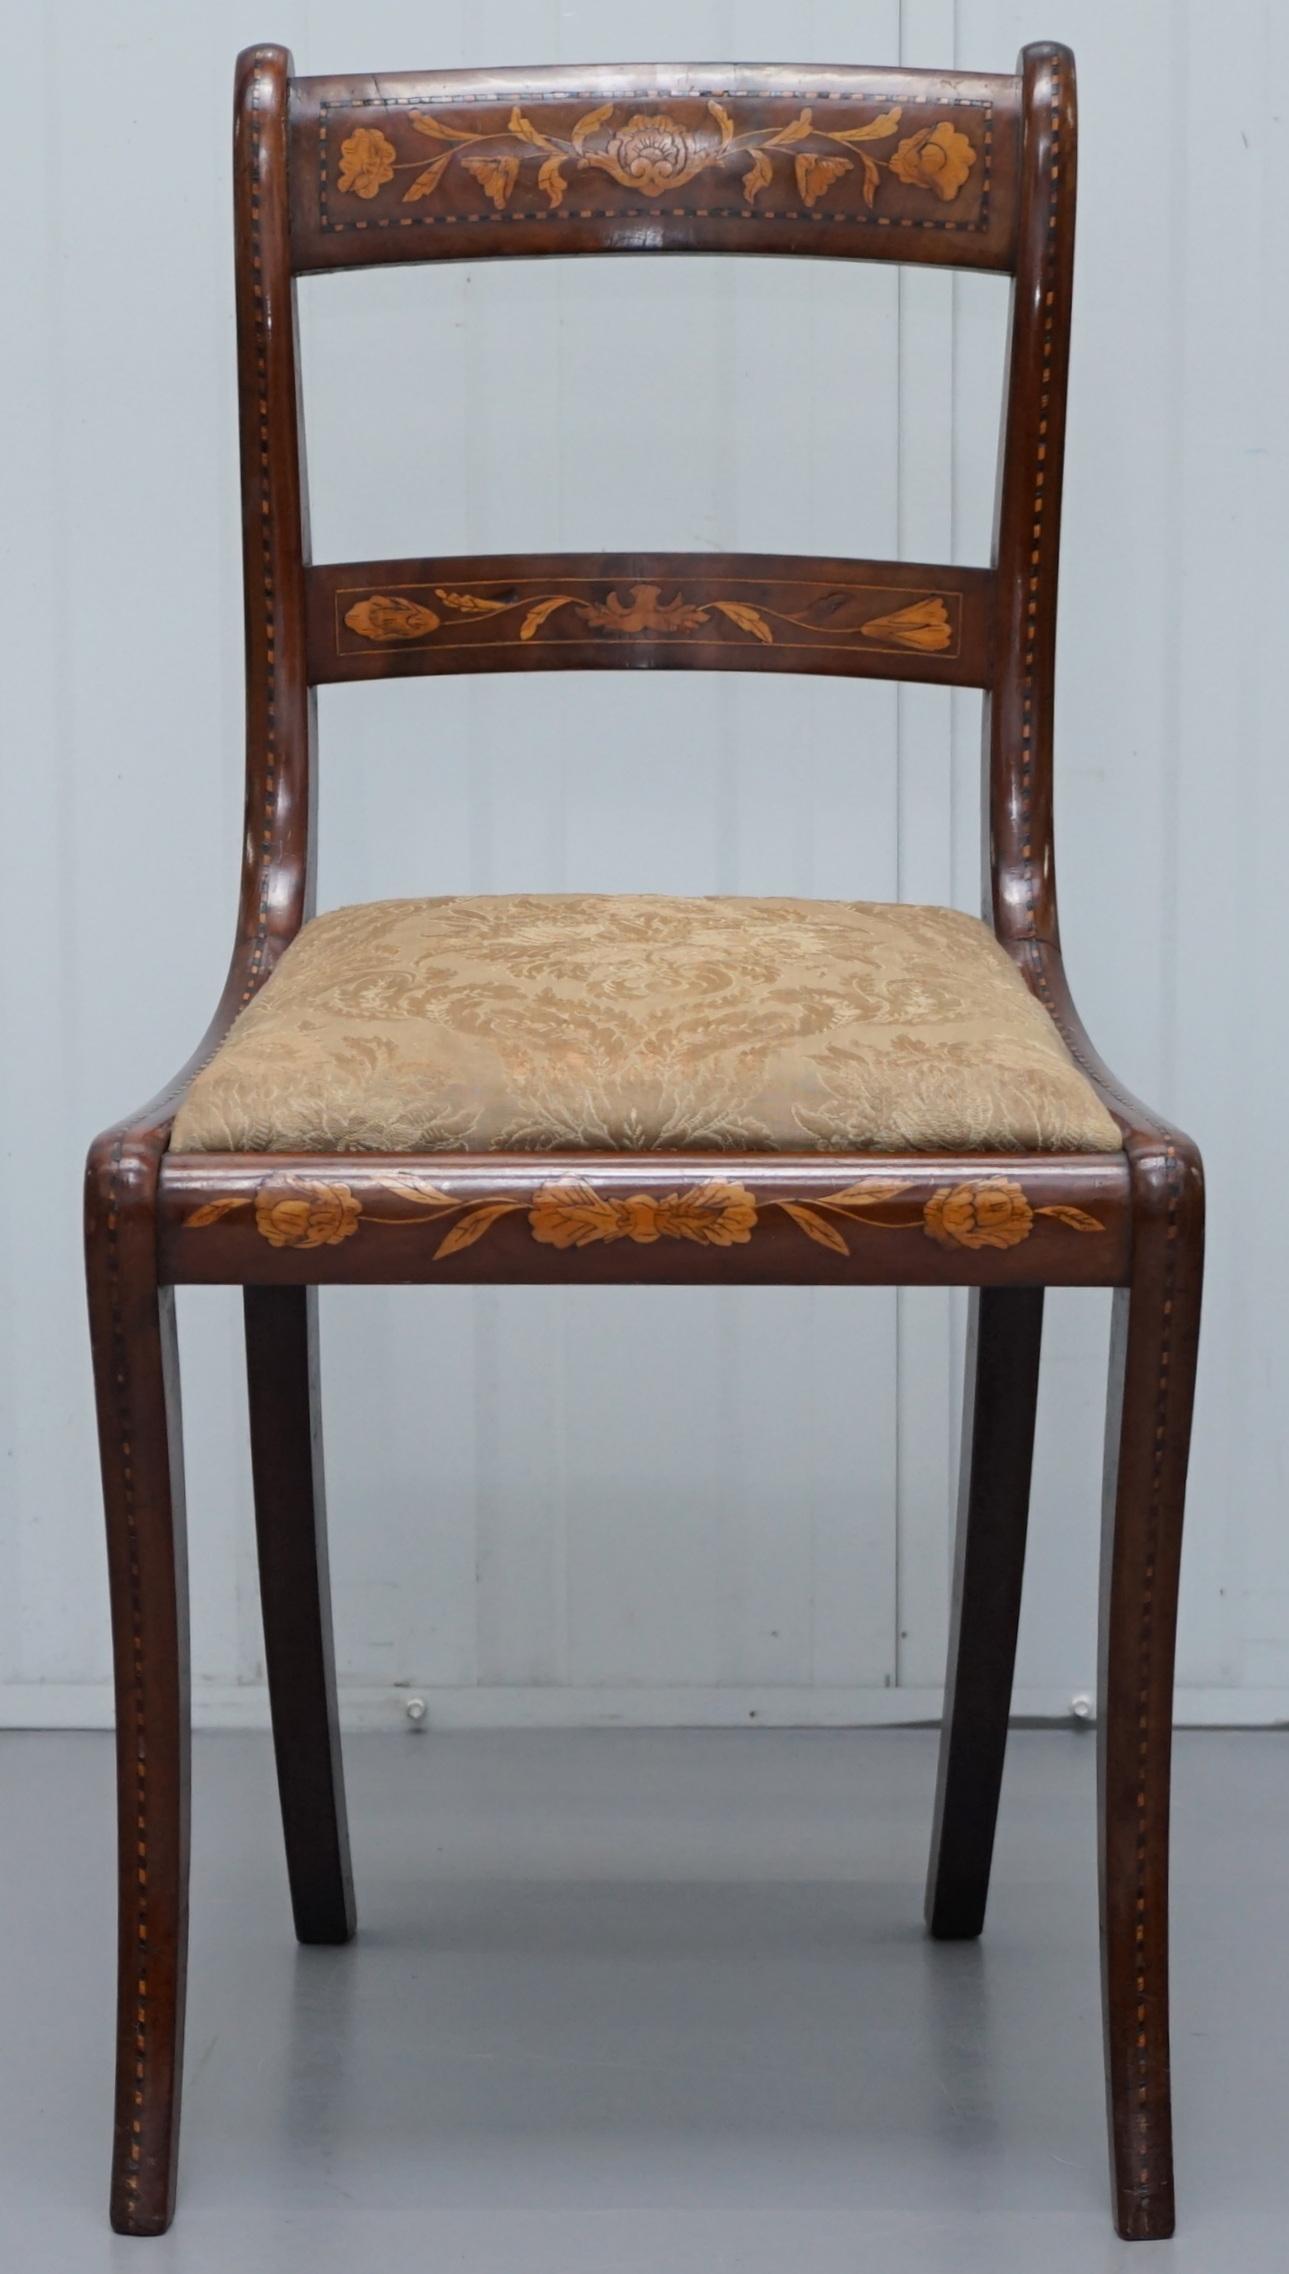 English Pair of Regency circa 1810 Satinwood Dutch Marquetry Ornate Inlaid Side Chairs